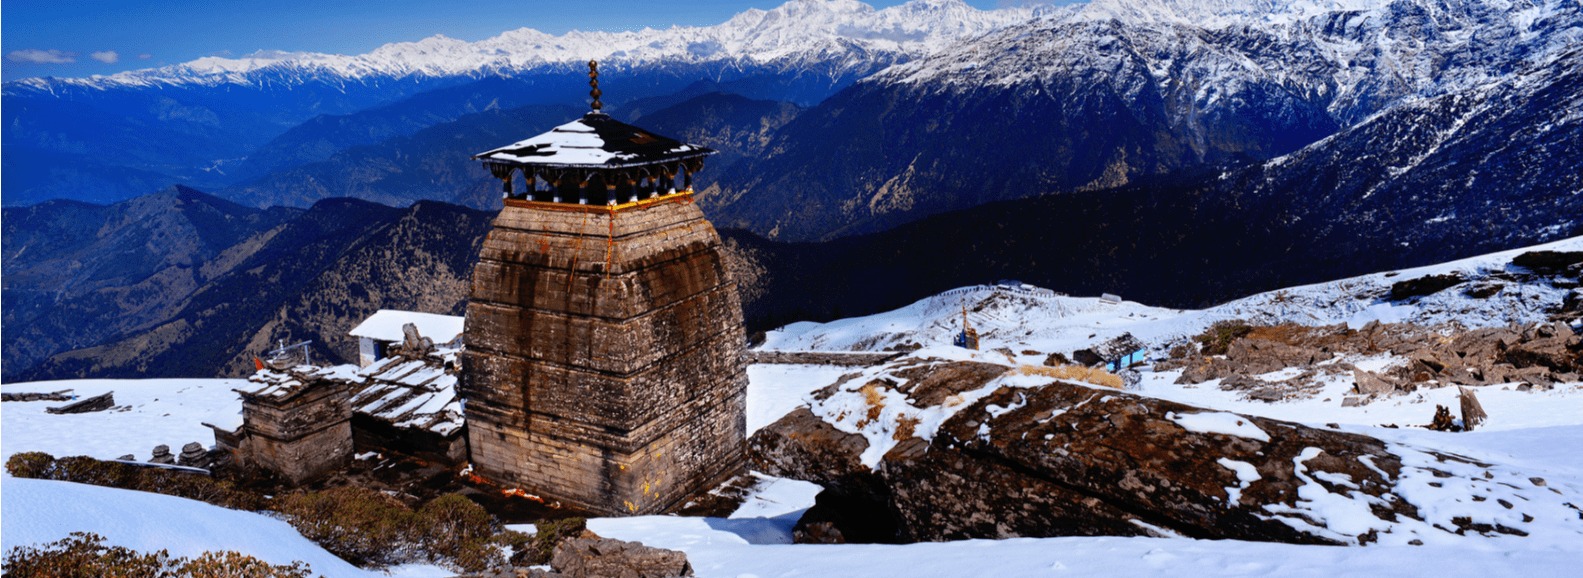 Tungnath temple in Uttarakhand is the highest Lord Shiva temple and is a part of Panch Kedar yatra